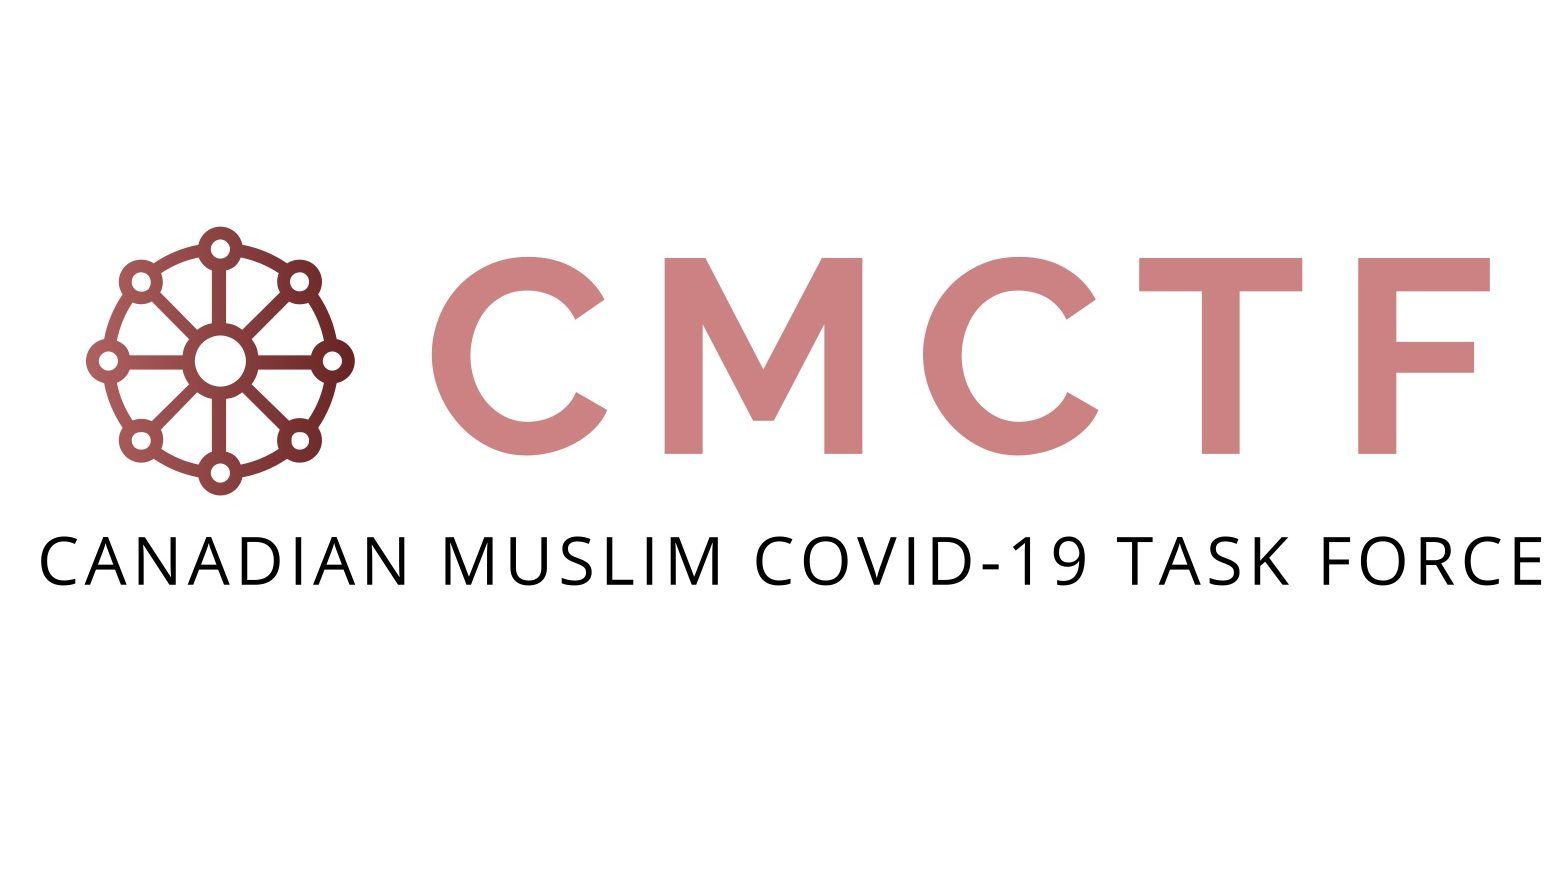 Canadian Muslim Communities Mobilize To Respond To Pandemic